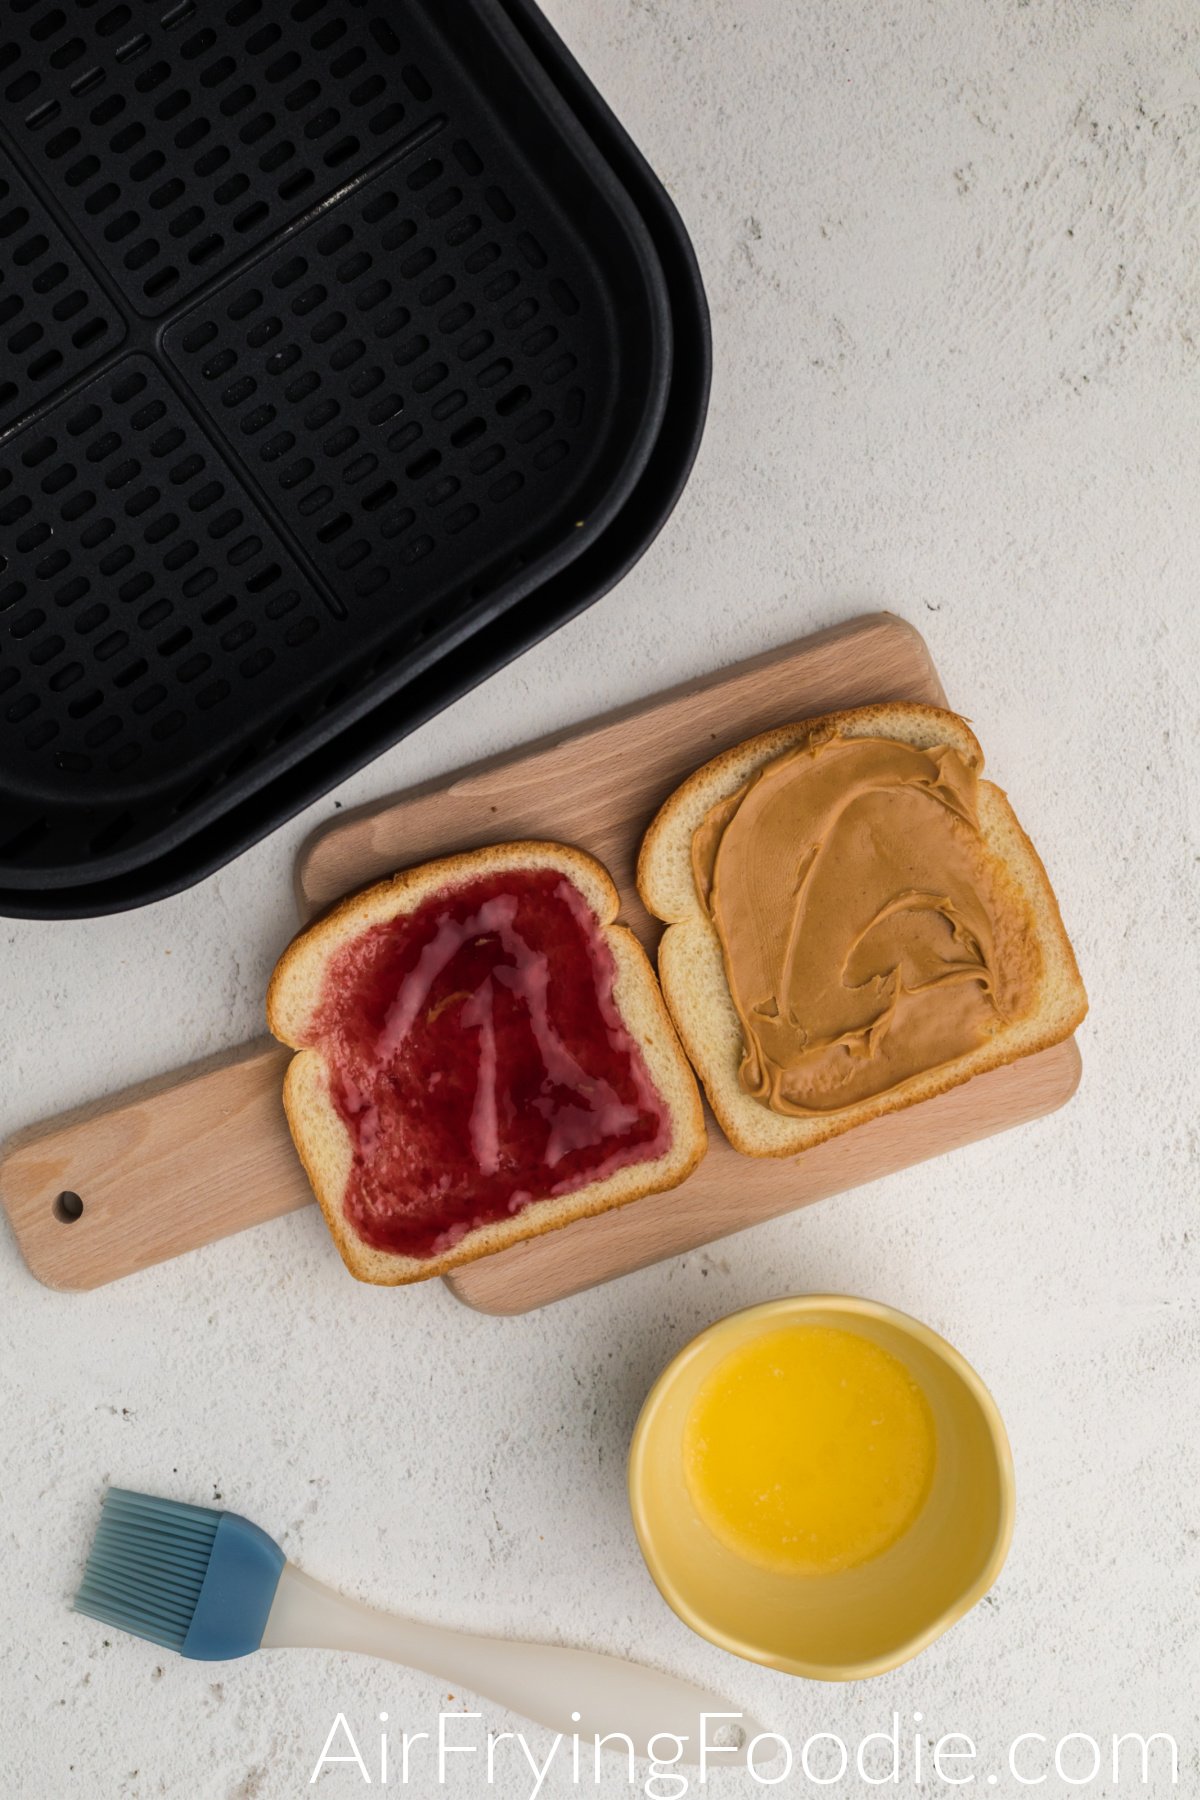 Cutting board with bread that has peanut butter and bread with jelly, and a bowl of melted butter on the side.